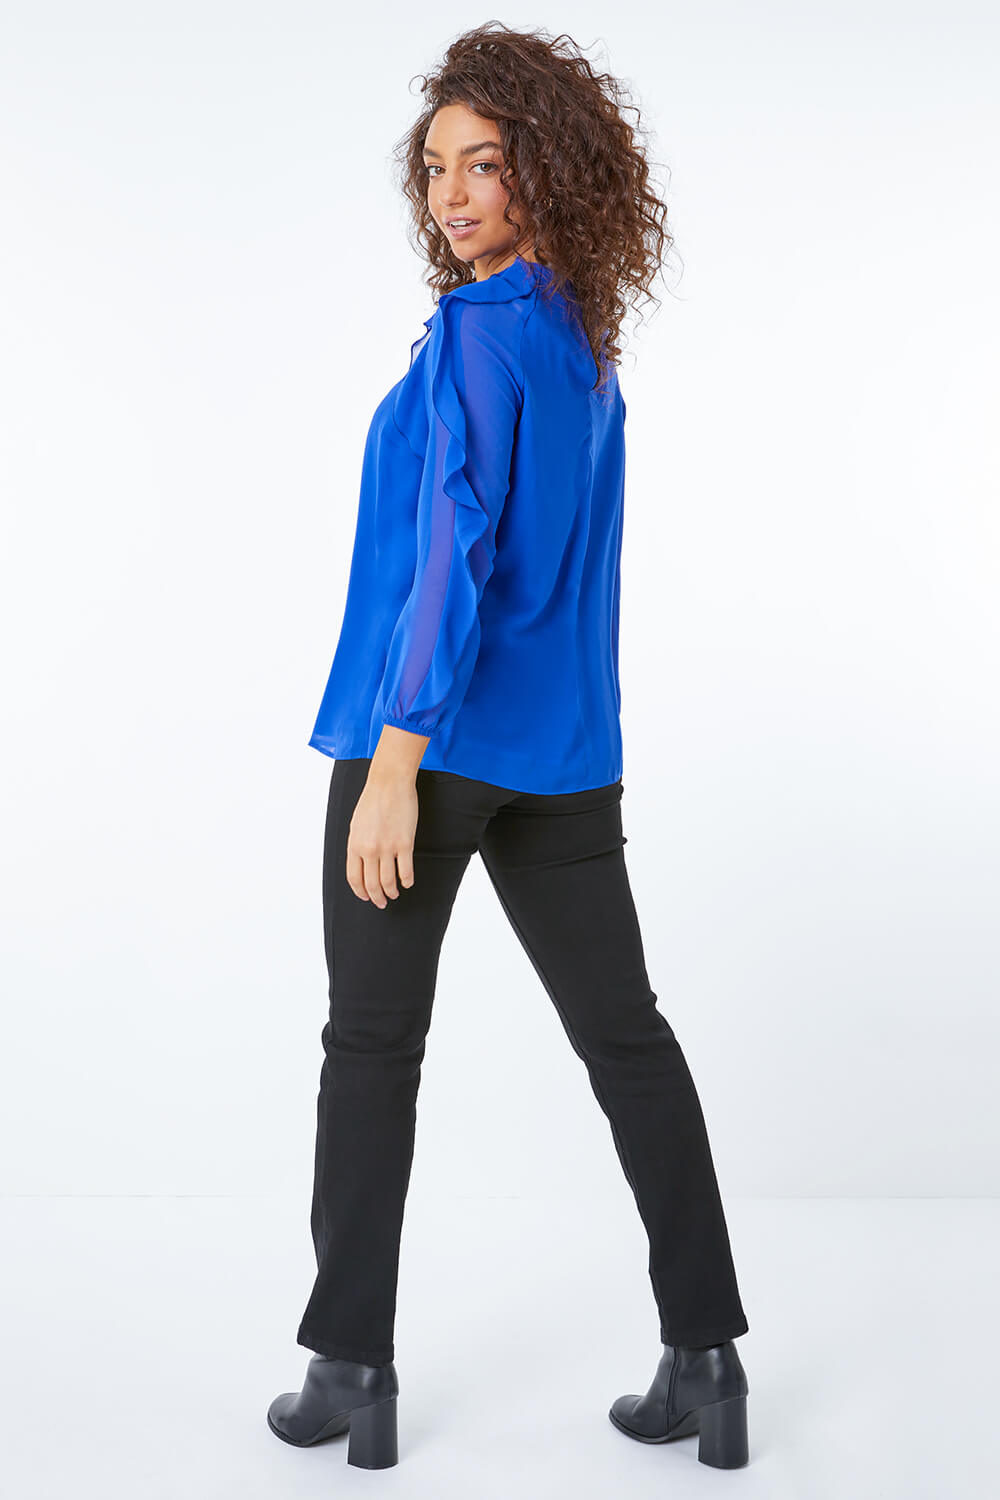 Royal Blue Petite Frill Sleeve Top, Image 3 of 5